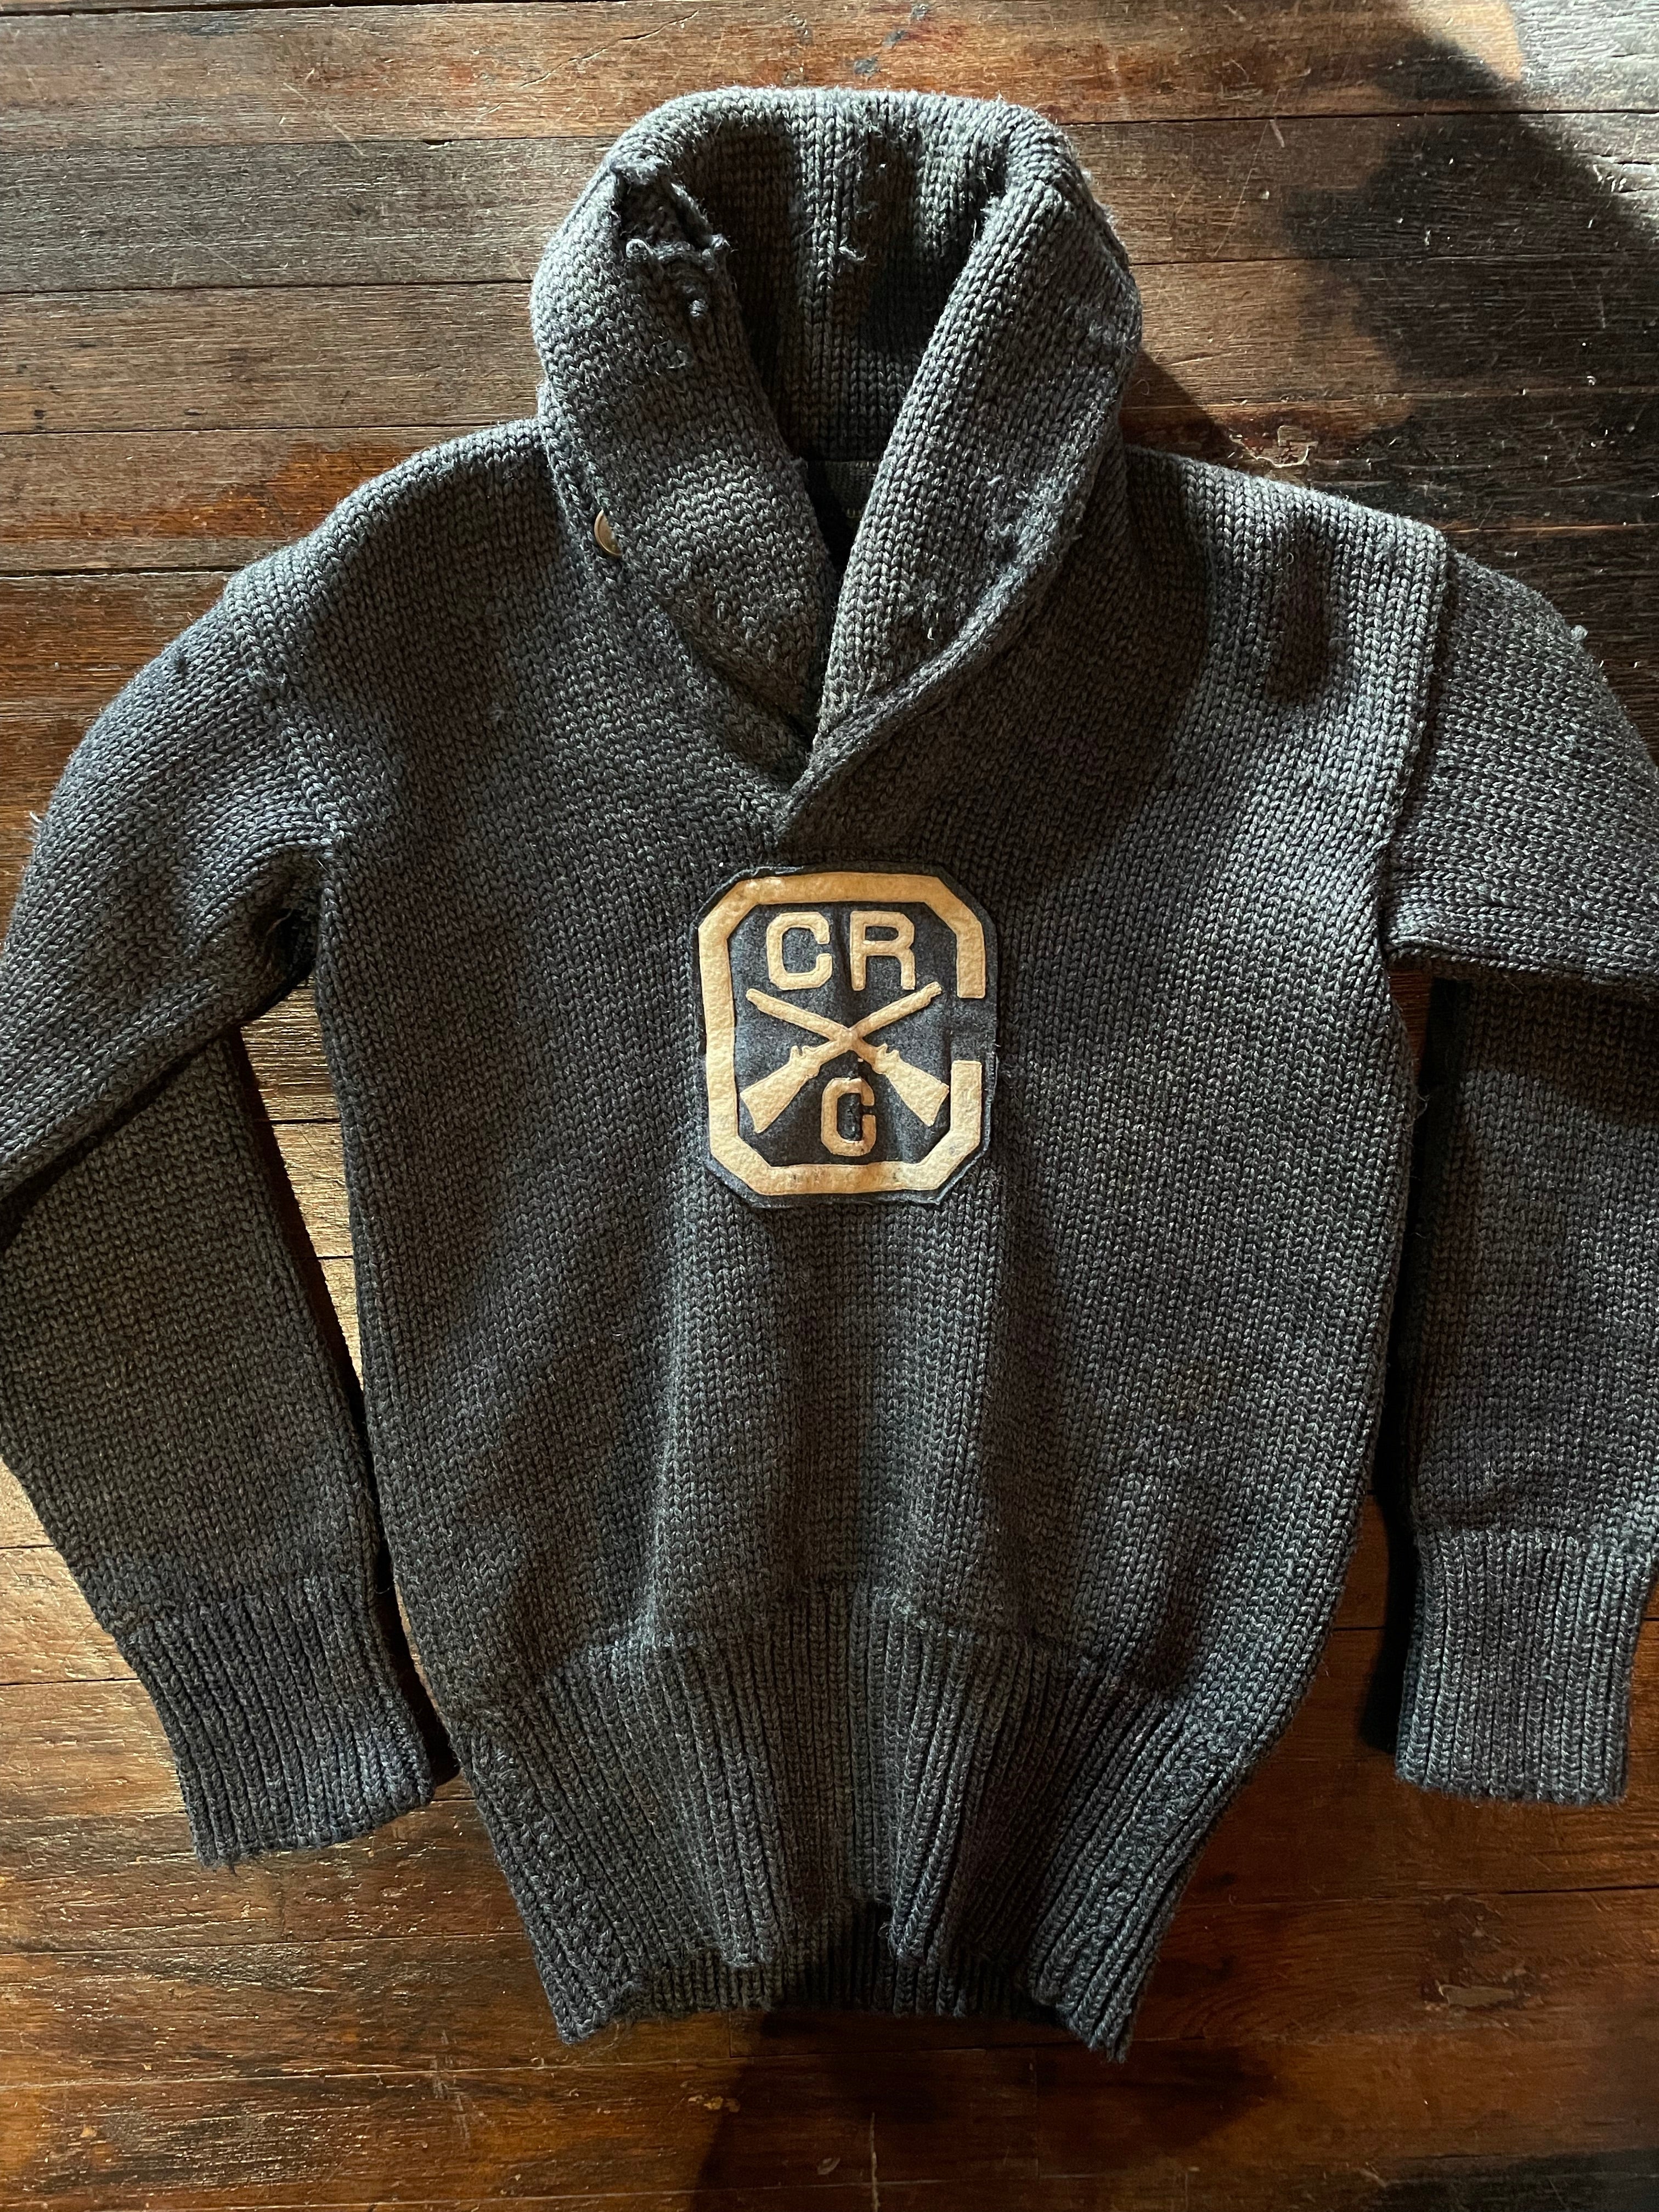 Rare Fisherman Wool Sweater with CRC Crossed Rifle Insignia Patch